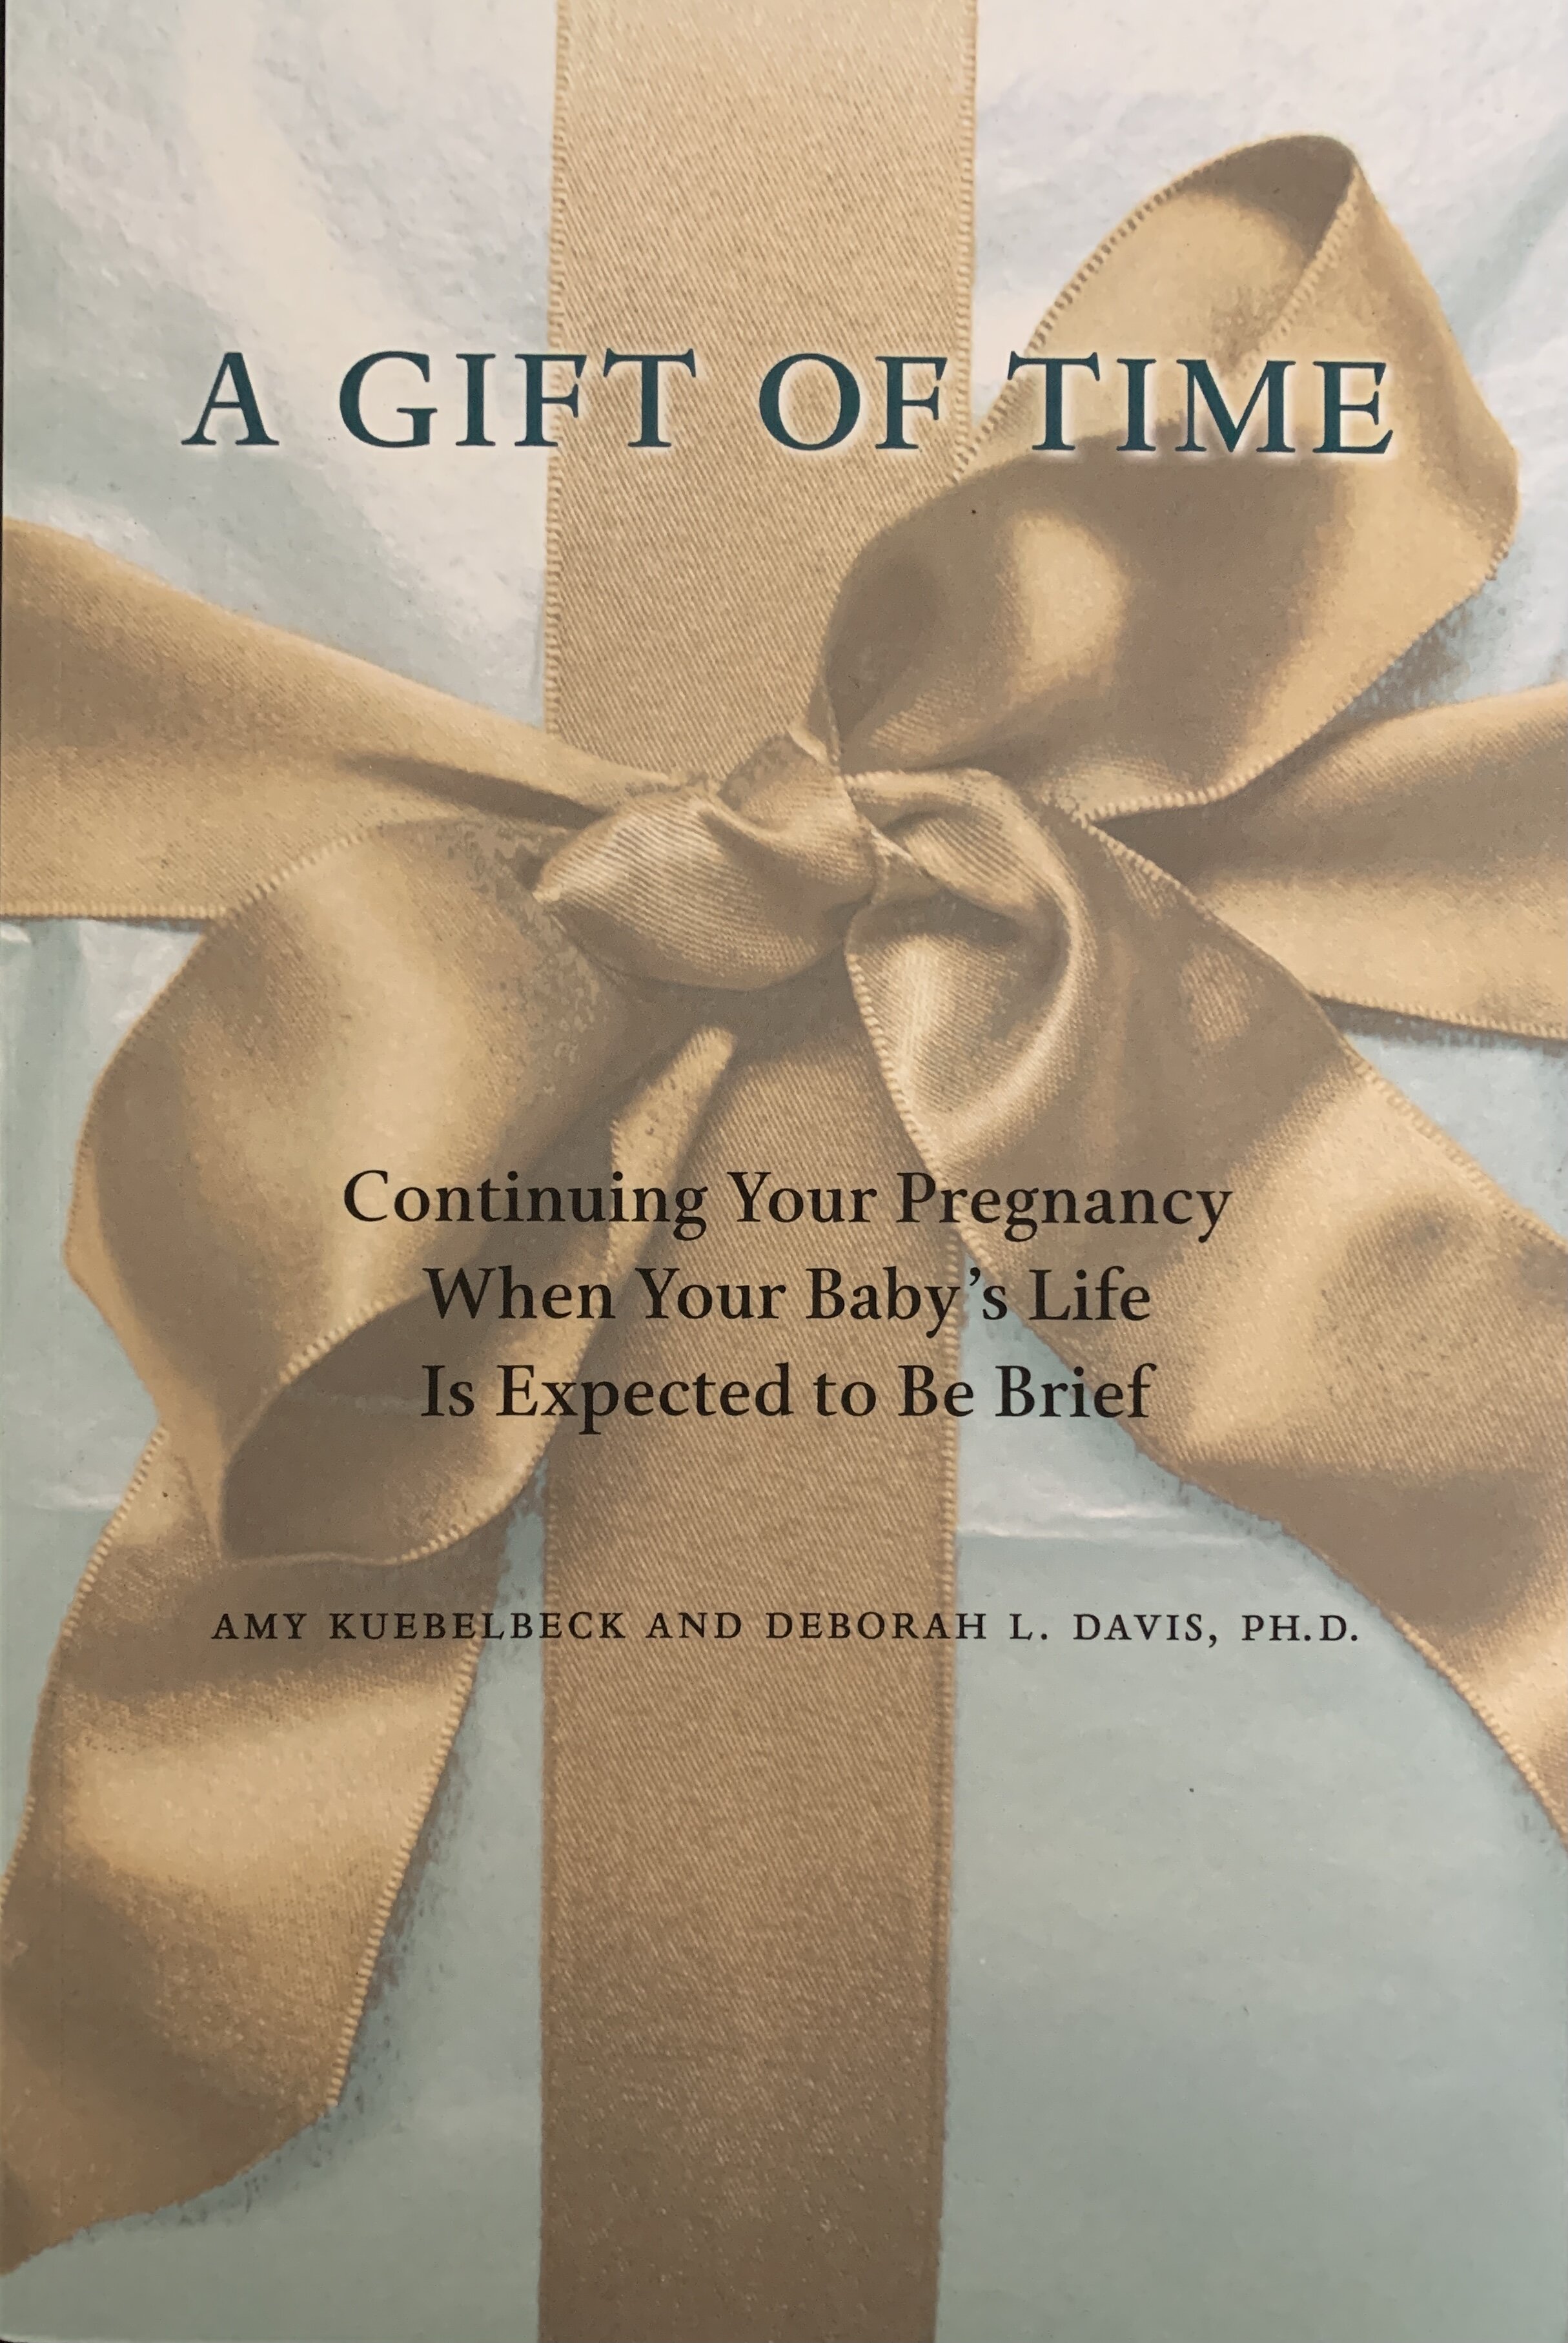 A Gift of Time (Copy) (Copy)